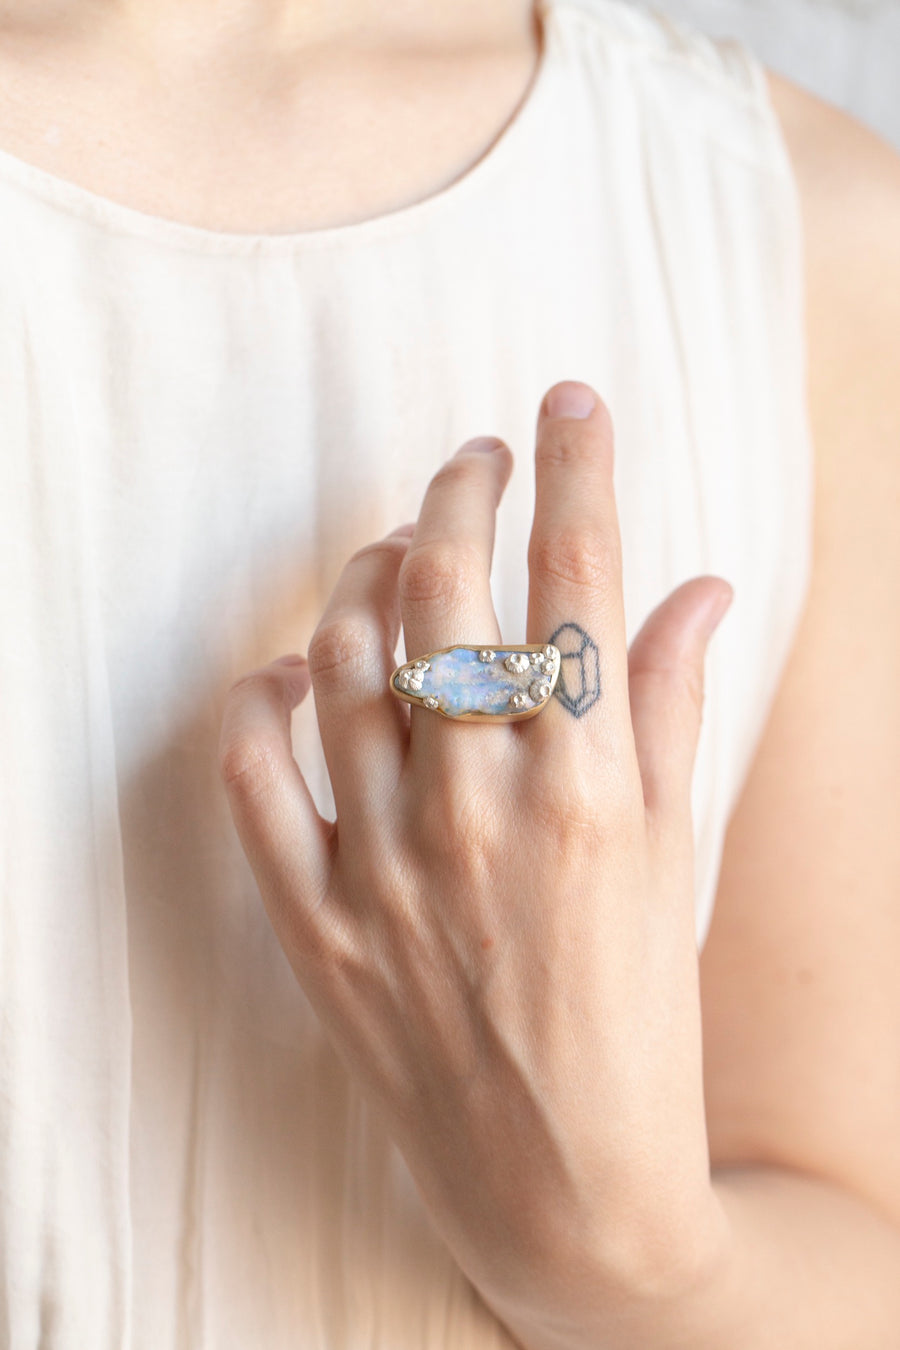 Melusine Opal Ancients Ring, 6.5-Hannah Blount Jewelry